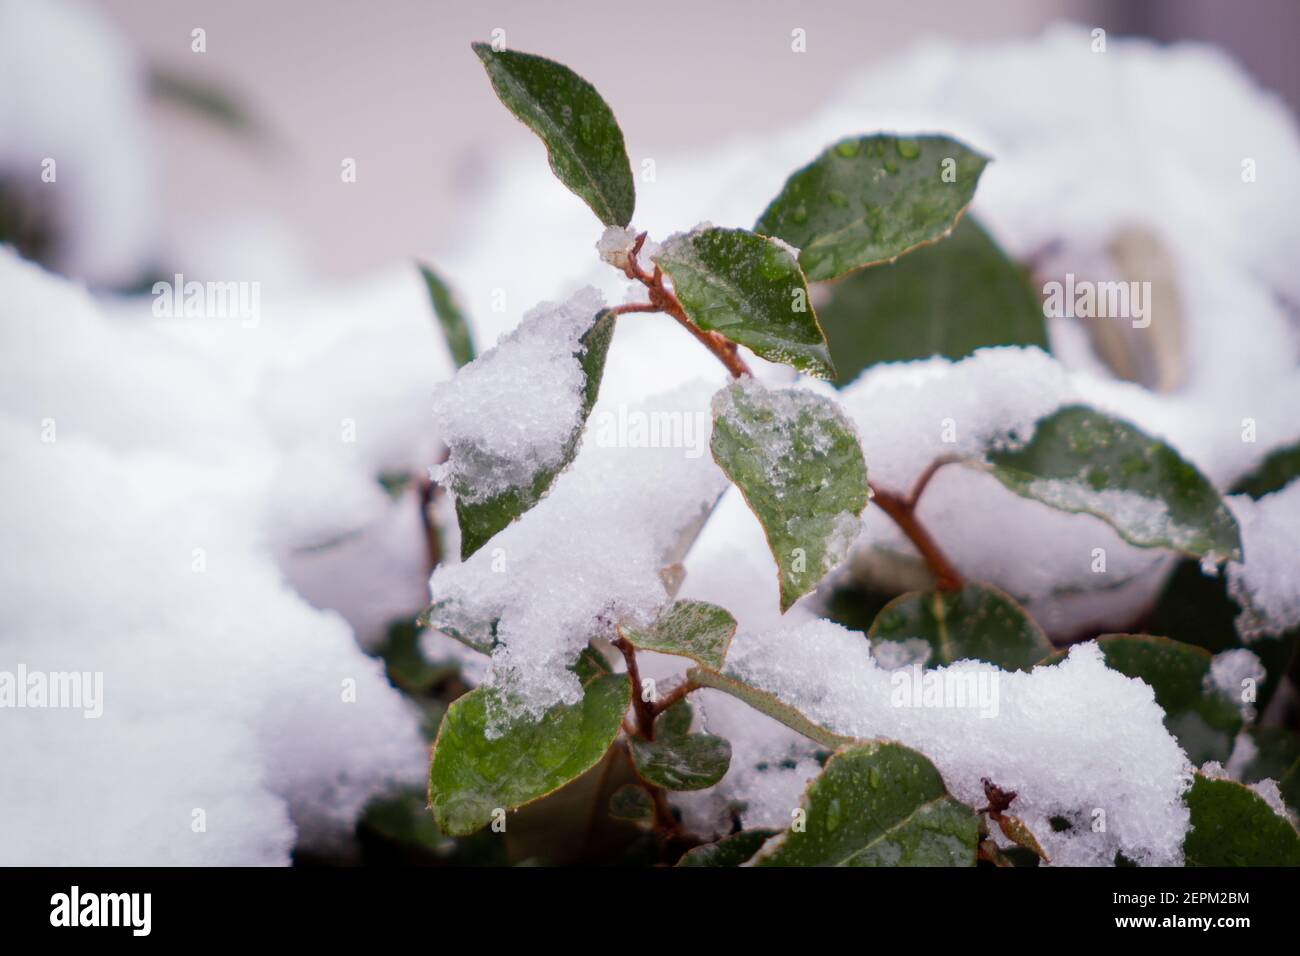 Close-up of some green leaves covered in snow Stock Photo